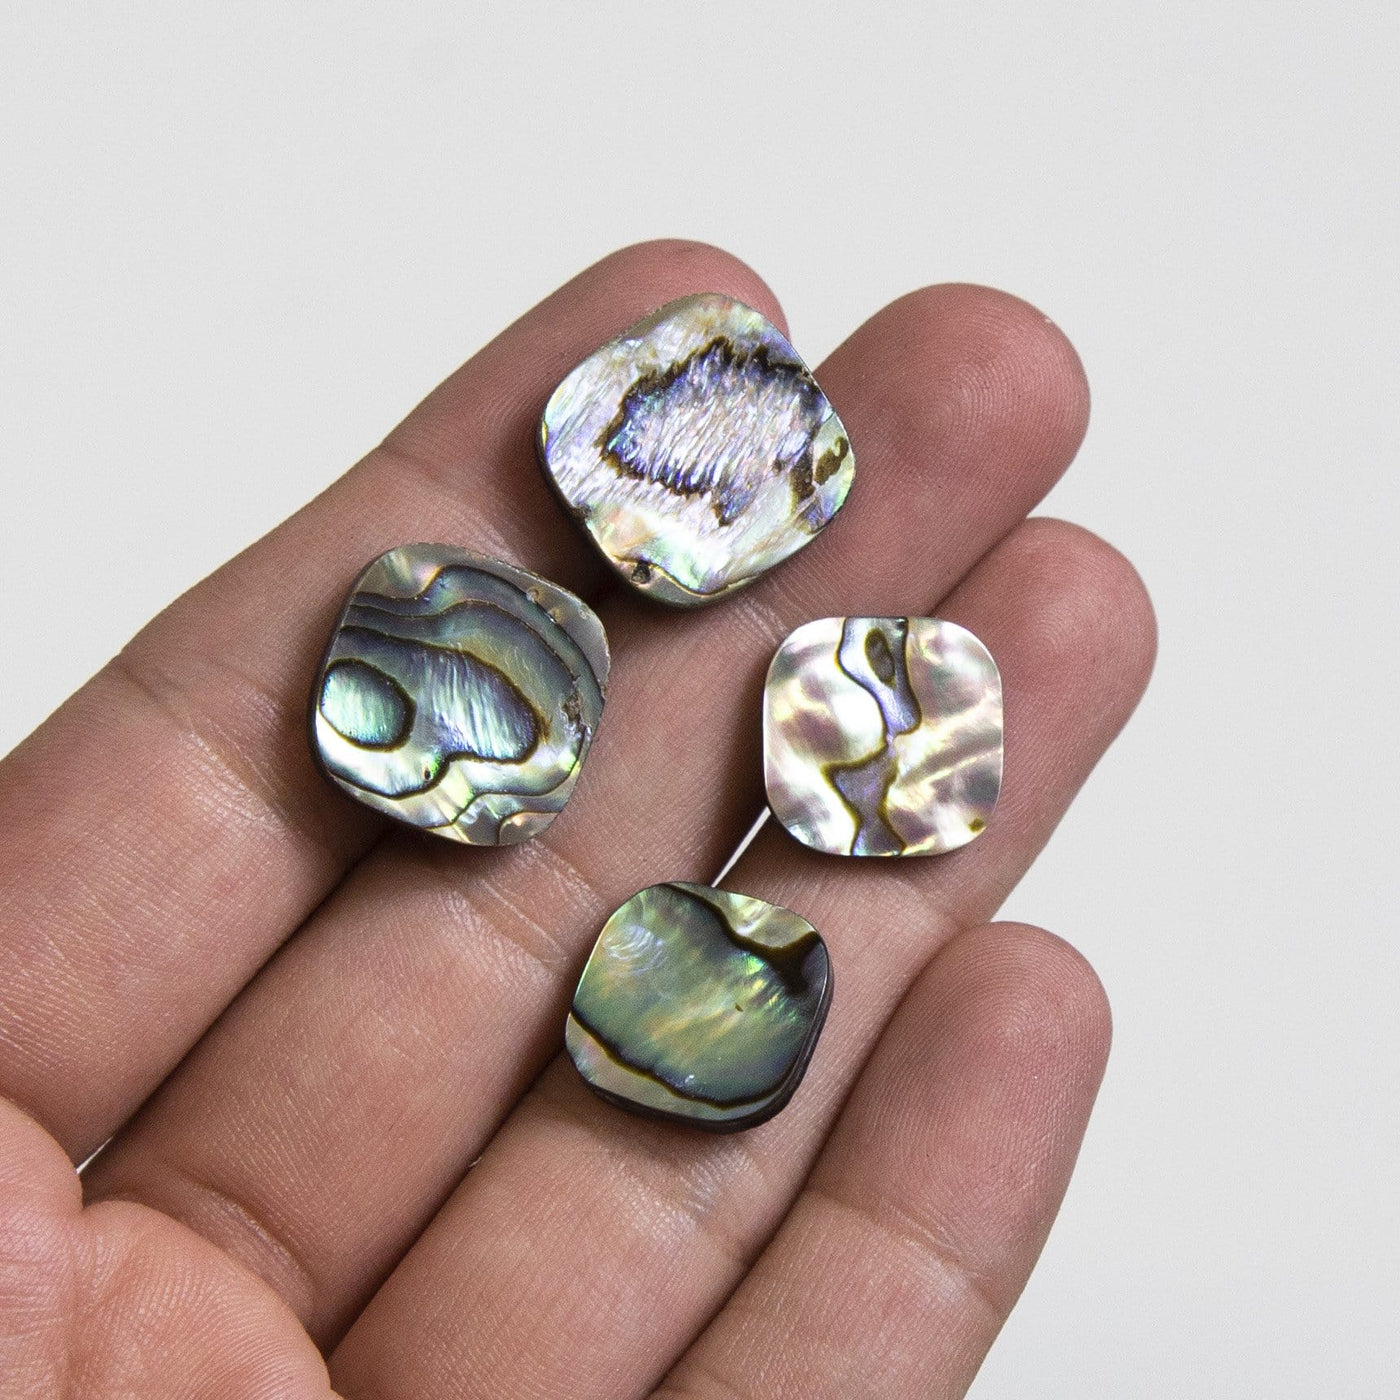 4 Abalone squares in a hand.